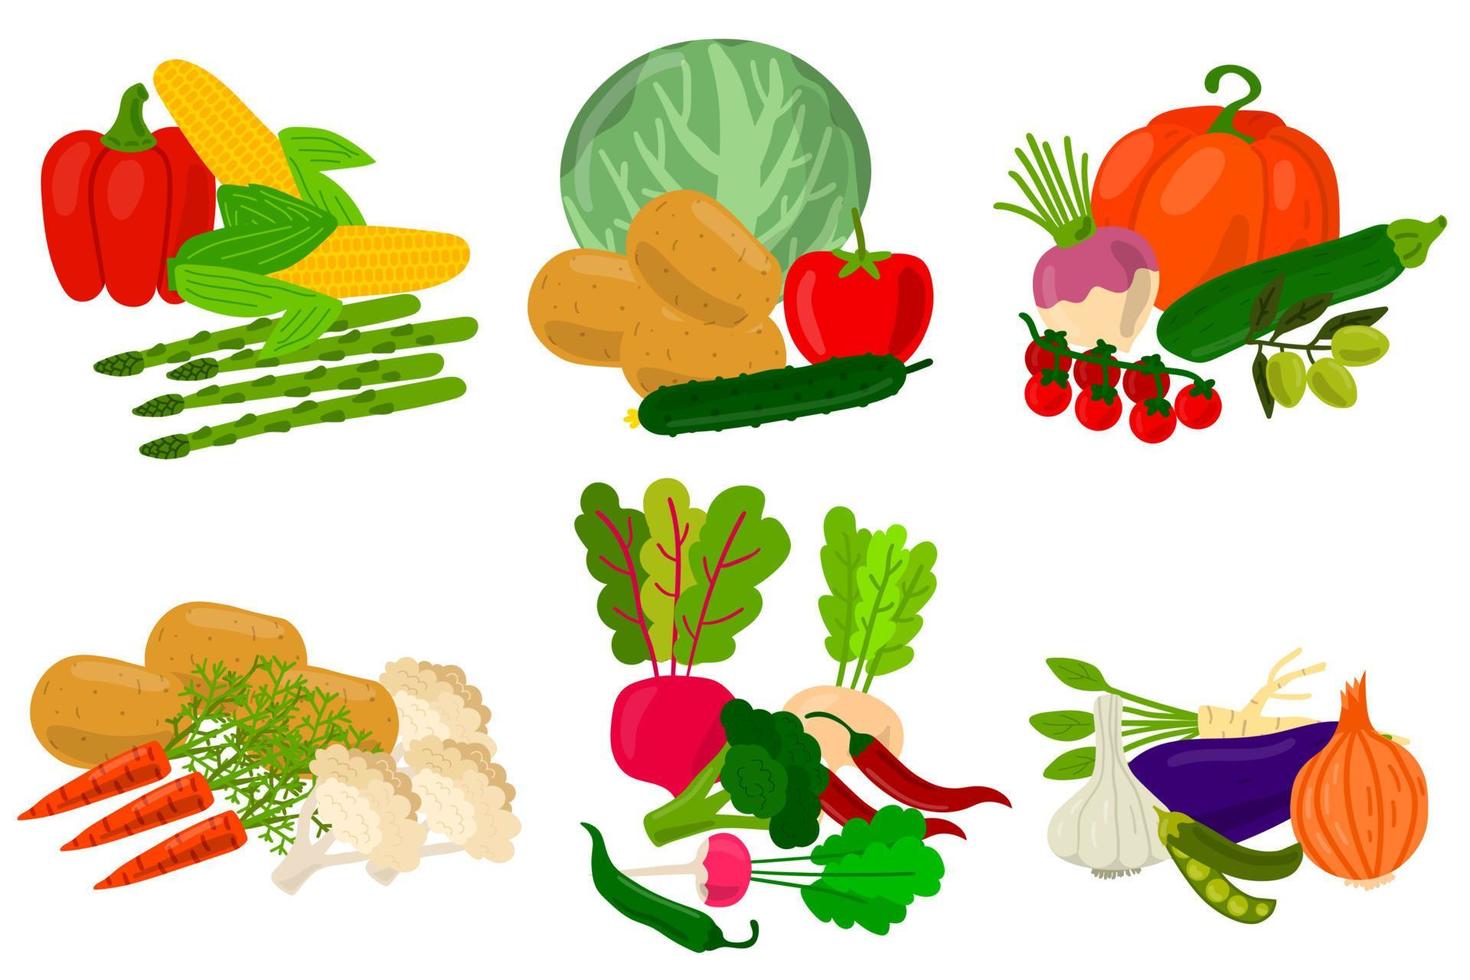 Harvest vegetable compositions in flat style isolated on white background. vector